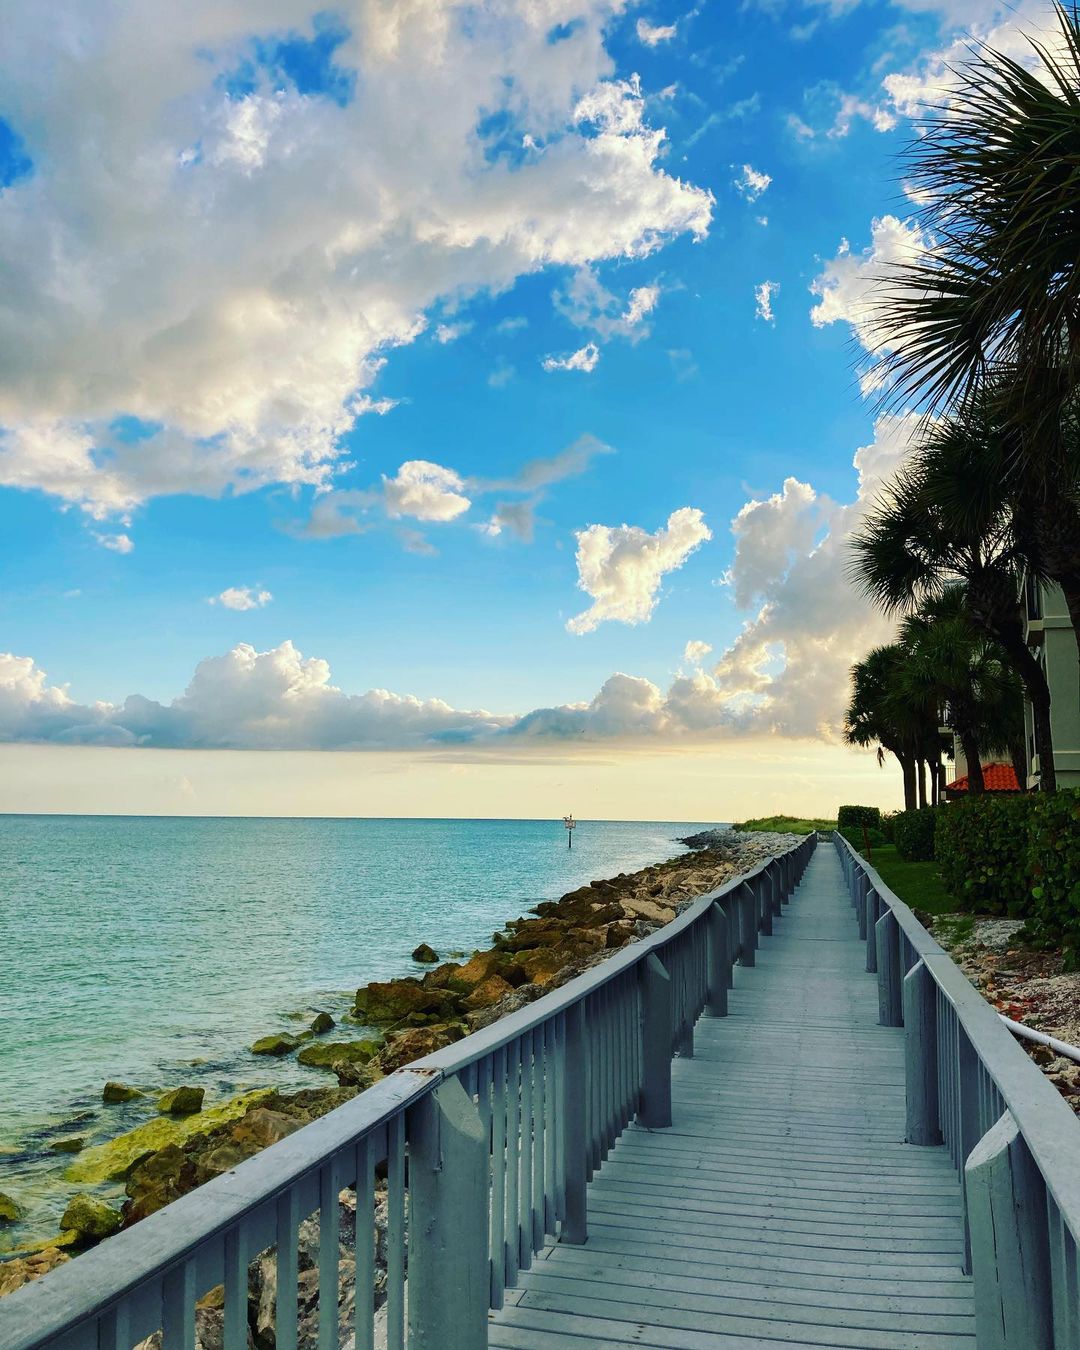 Sunset View of Treasure Island Beach from Dock. Photo by Instagram user @mklynch24